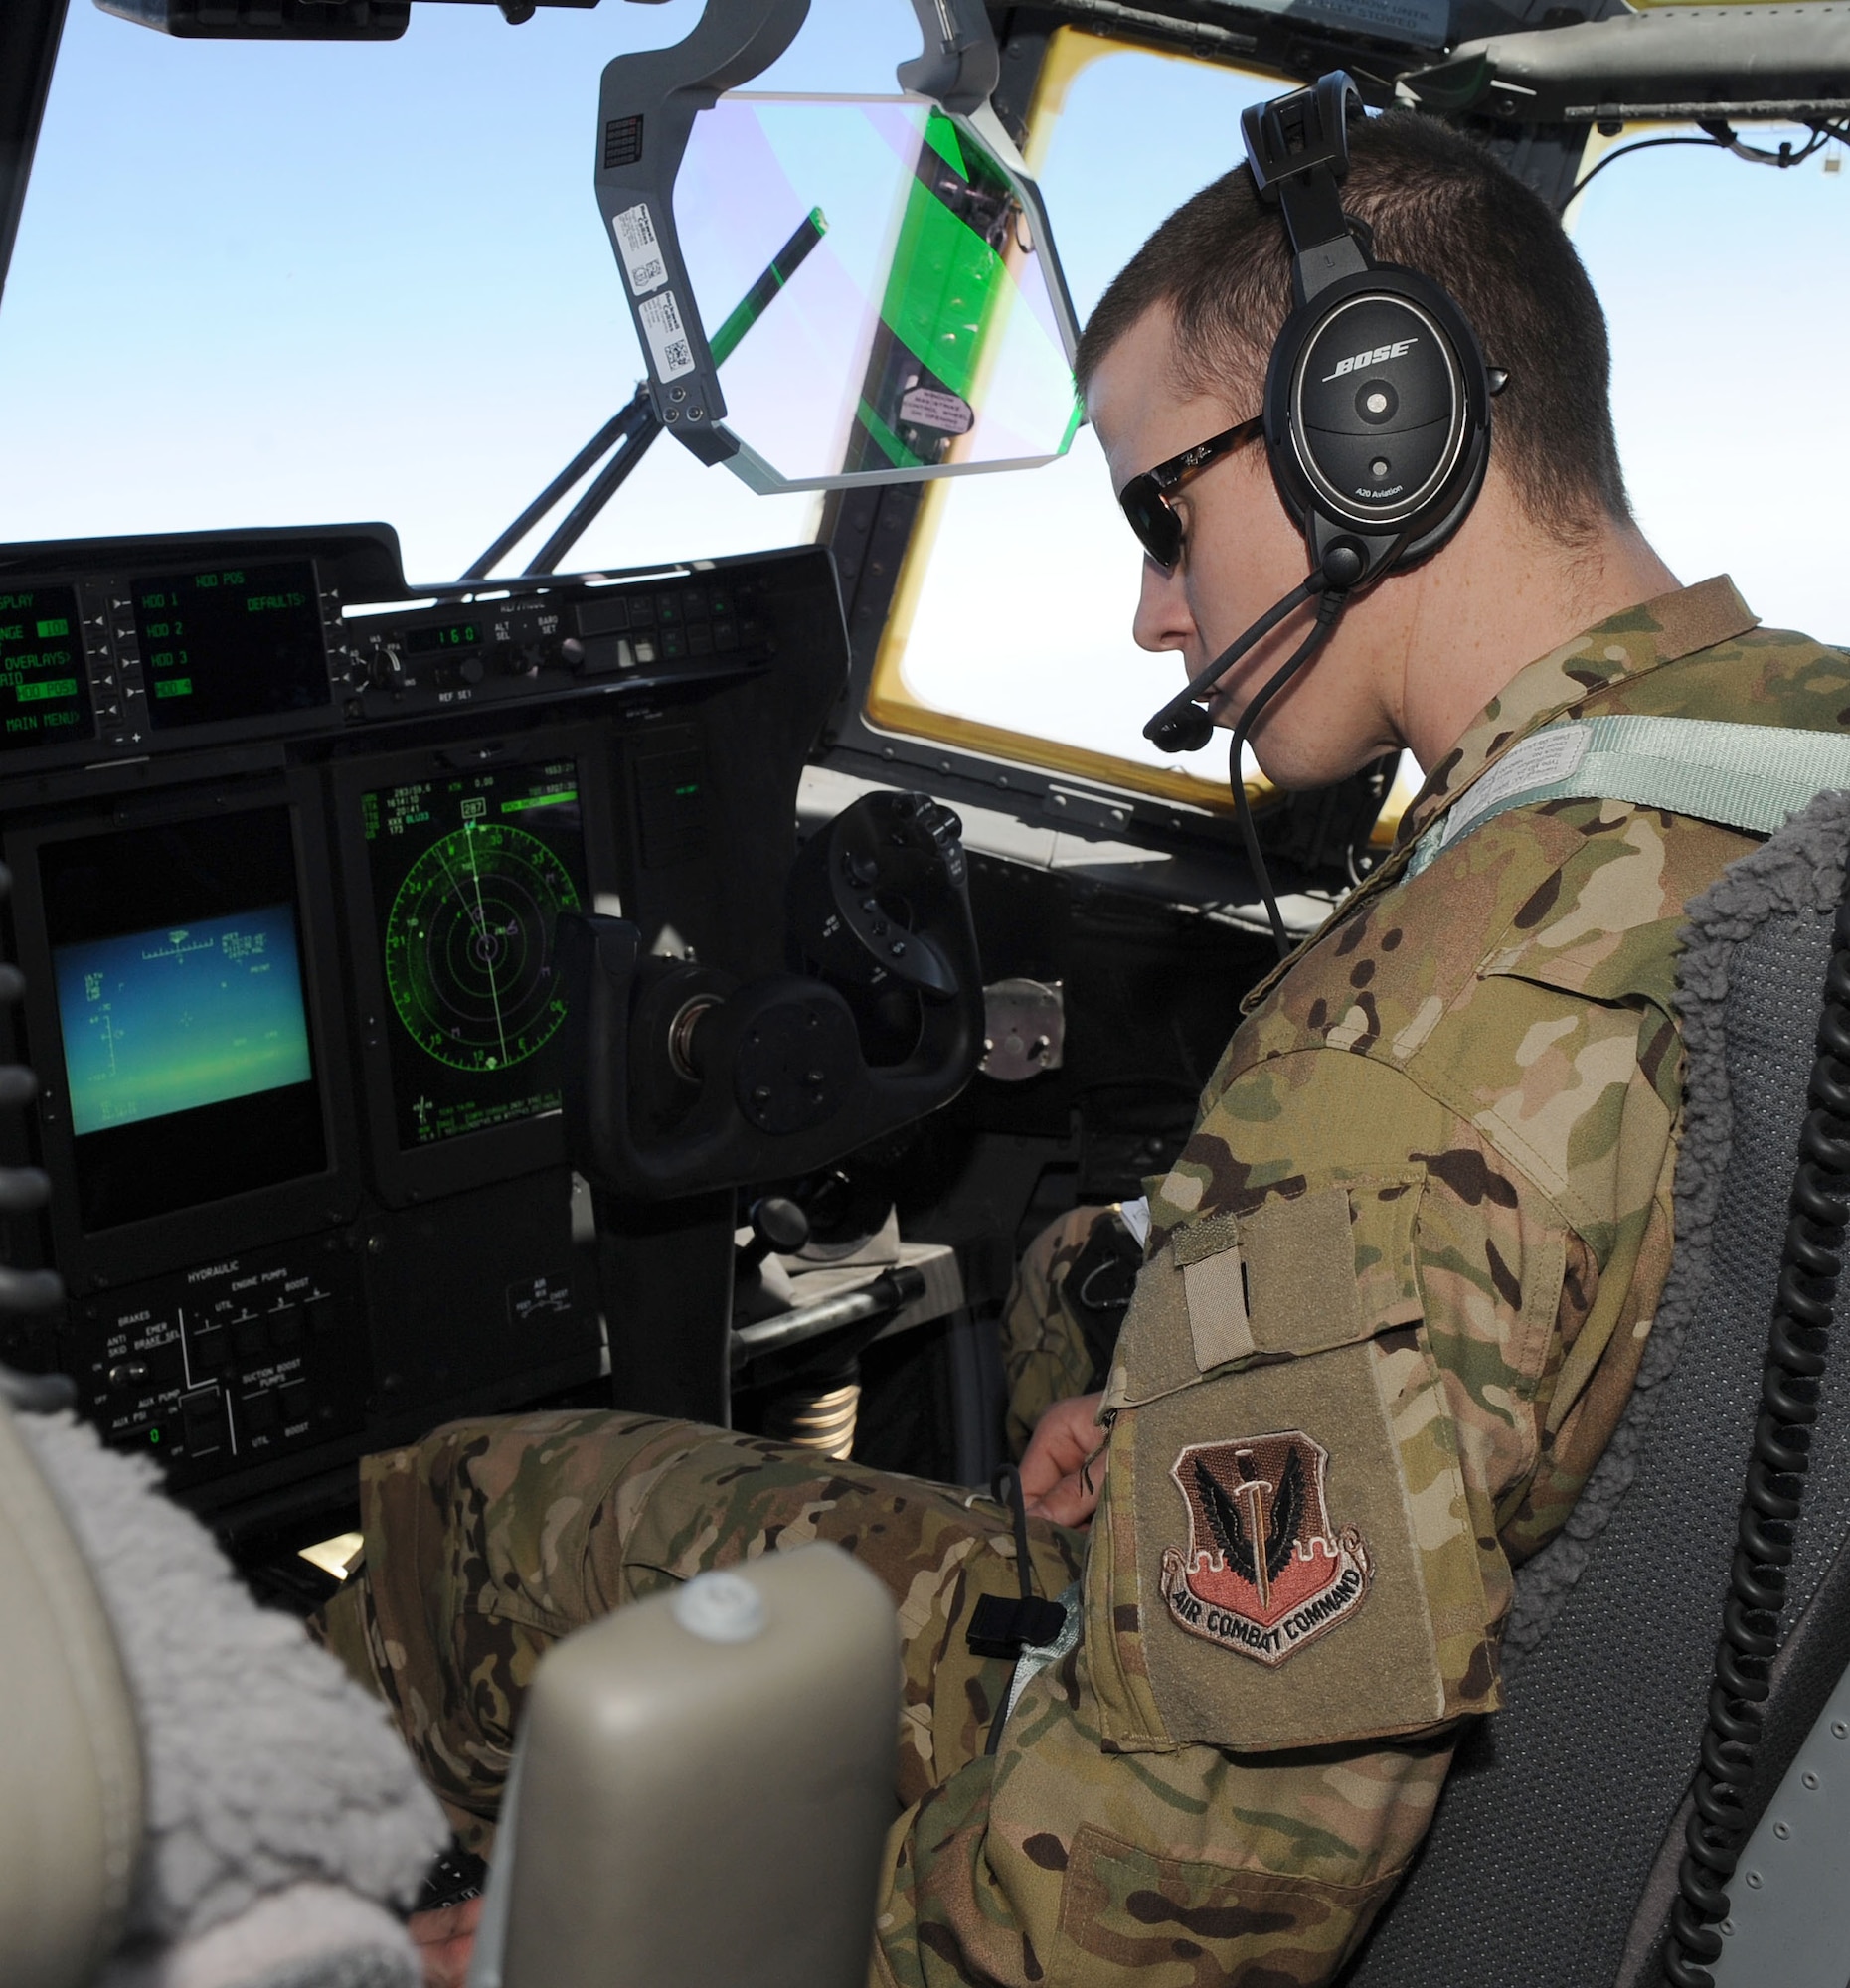 U.S. Air Force Capt. Edward Montgomery, 79th Rescue Squadron, flies the HC-130J Combat King II over San Diego, Calif. in support of Angel Thunder April 18. The 79th RQS is preparing to take the new HC-130J Combat King II on its first ever real world deployment in support of contingency operations. (U.S. Air Force photo by Senior Airman Brittany Dowdle)